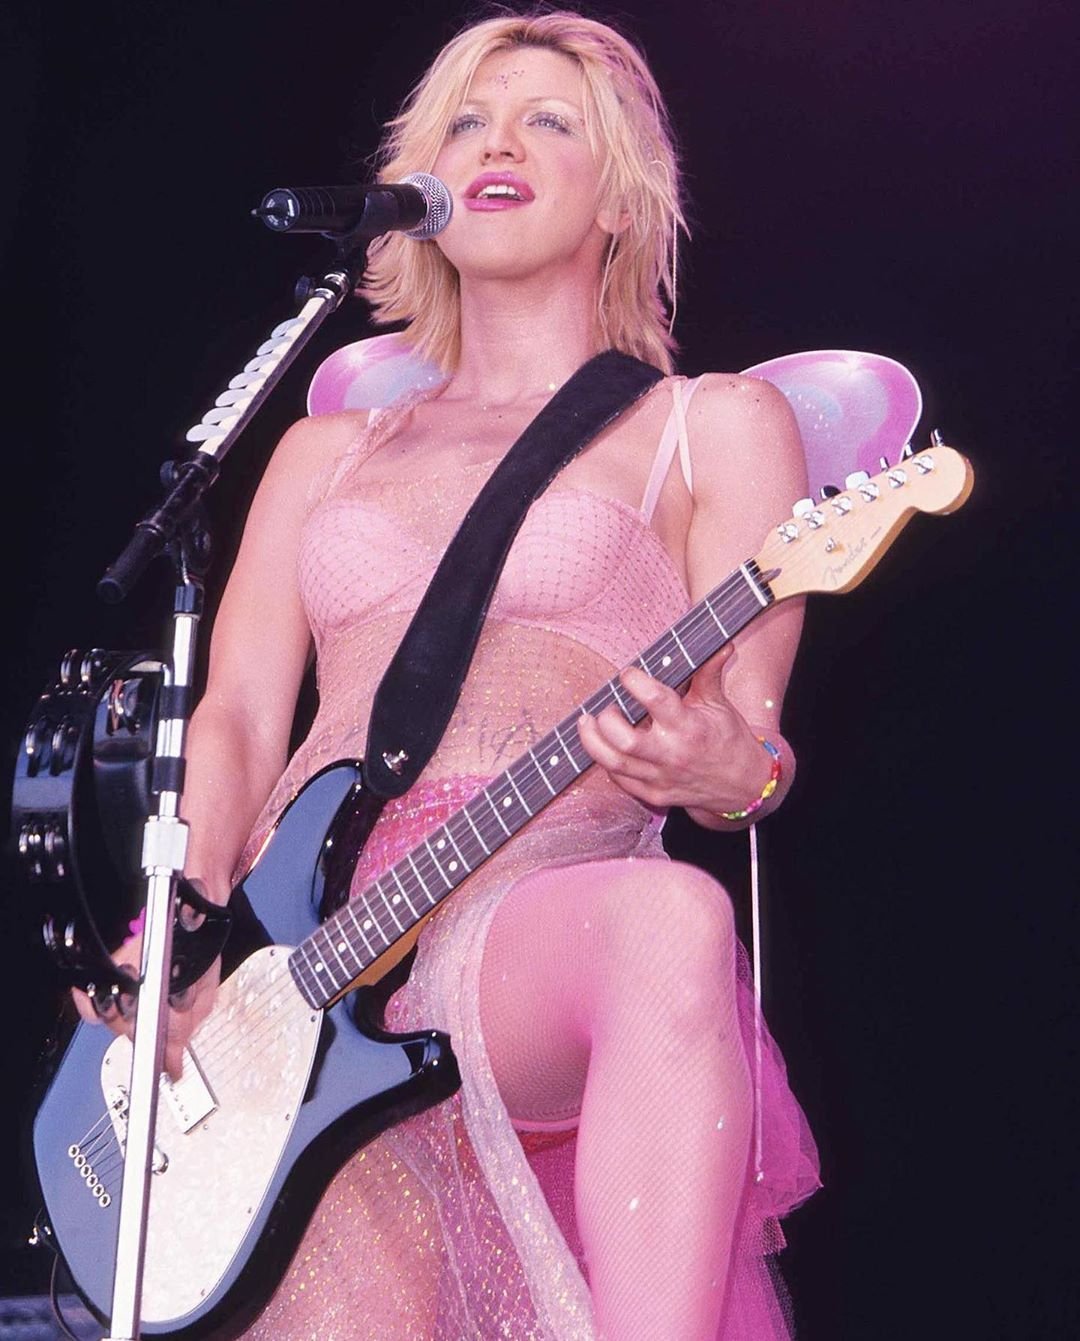 deepak thota recommends courtney love topless concert pic